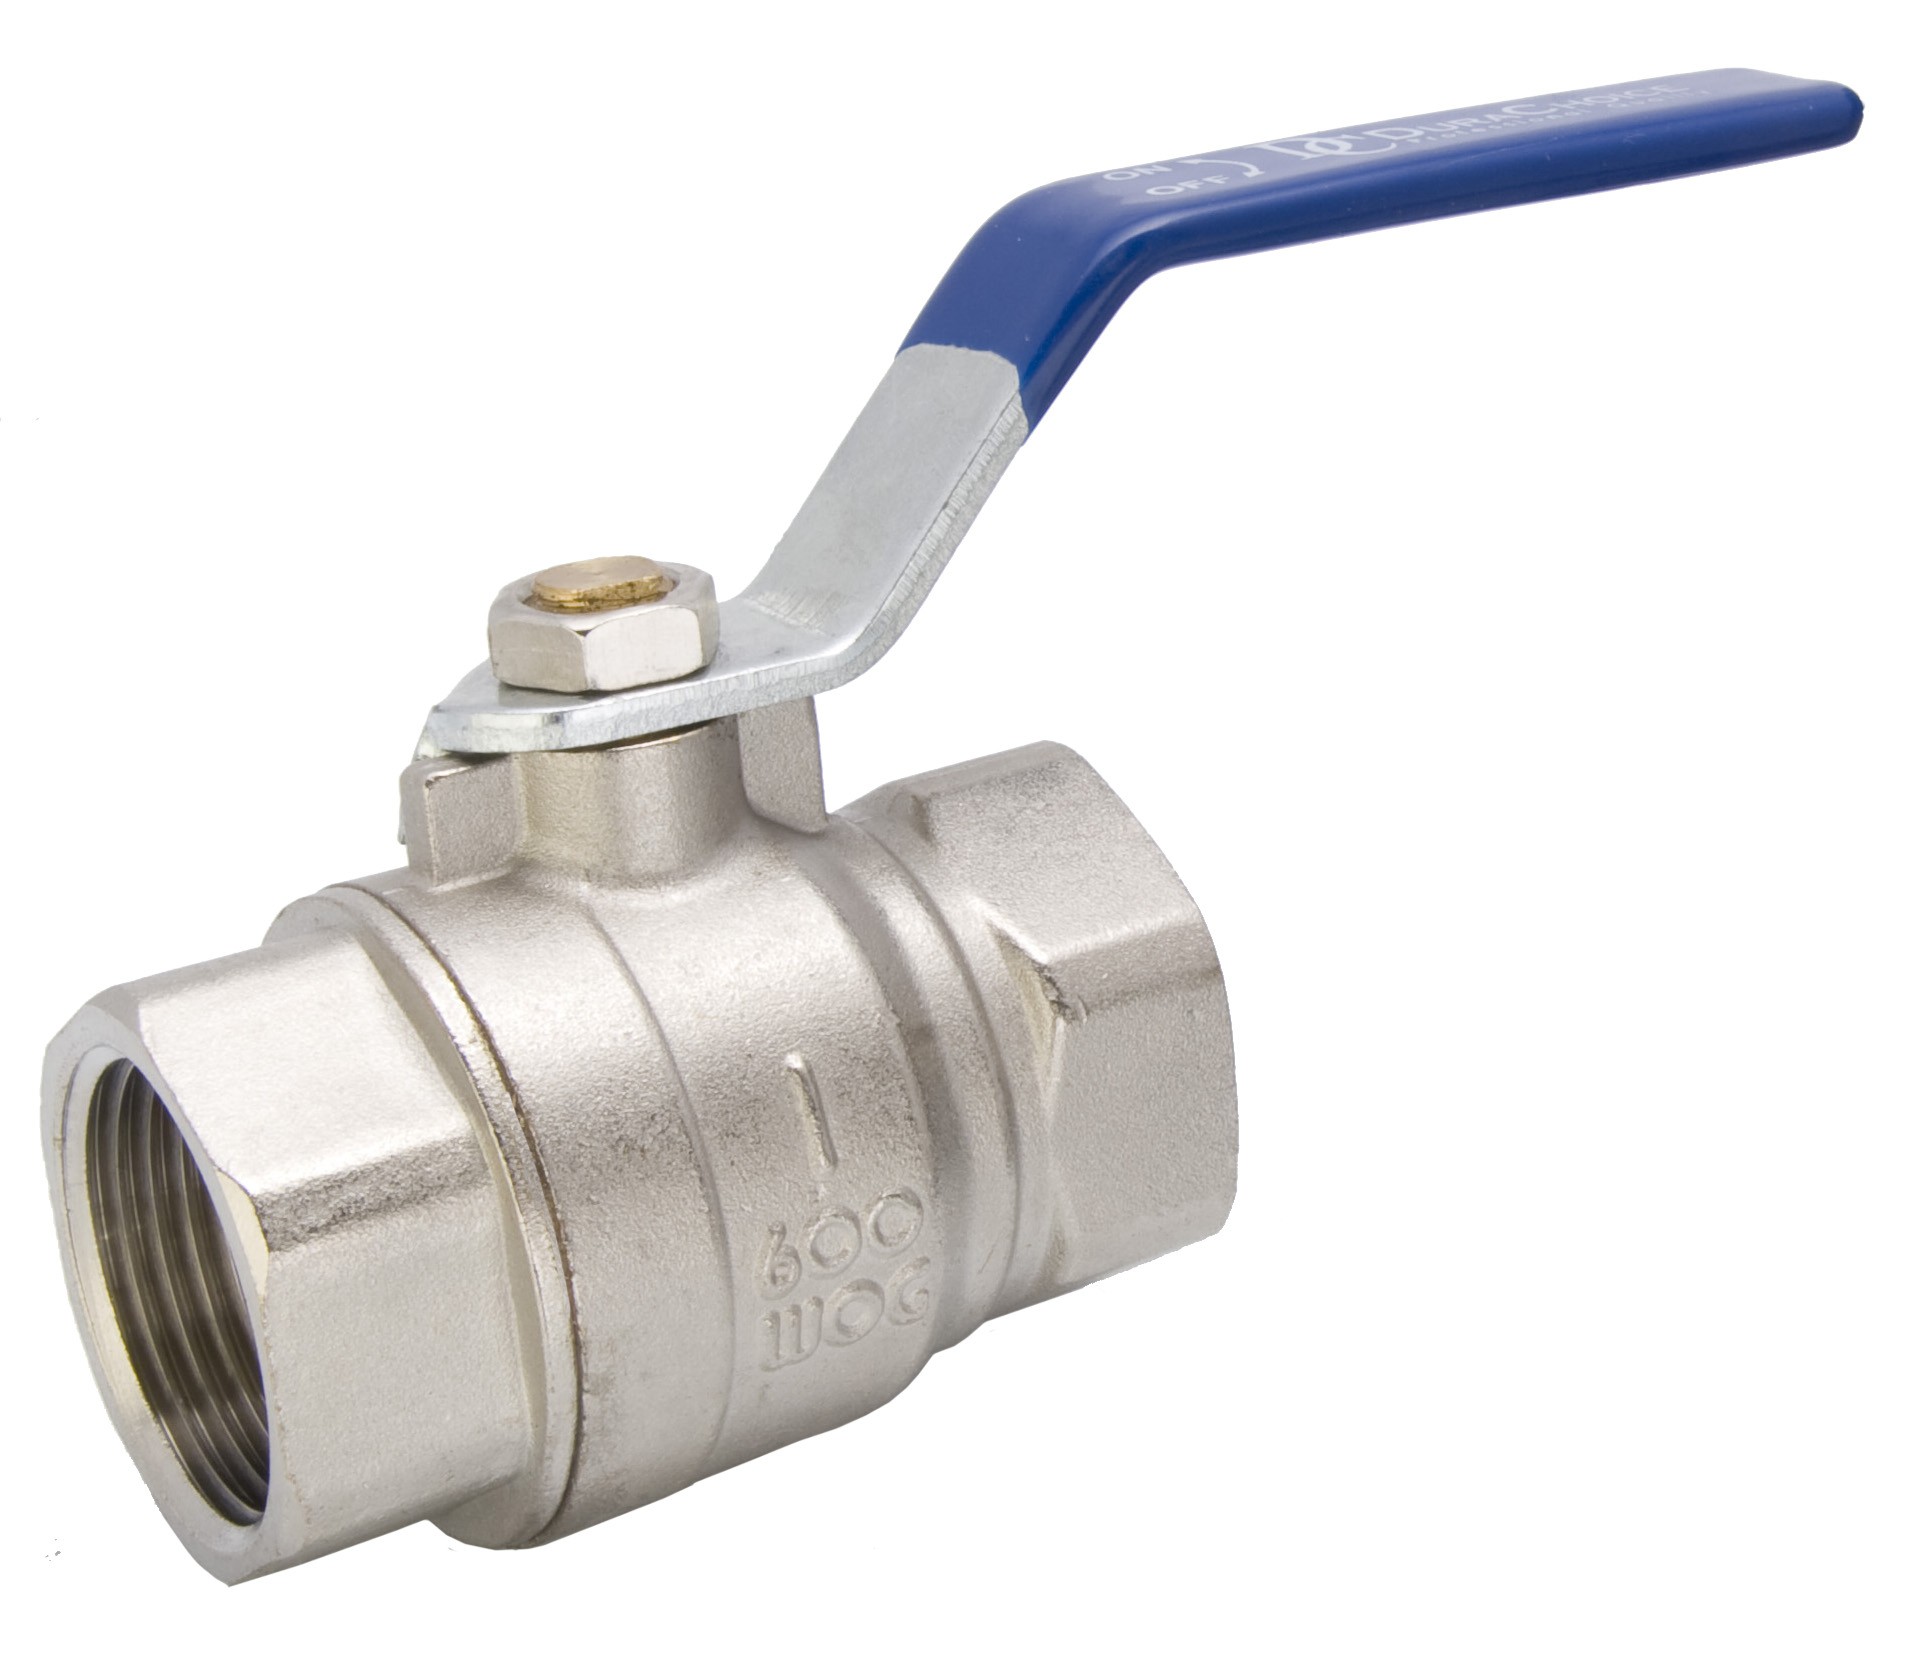 WHAT IS A PNEUMATIC THREE-WAY BALL VALVE